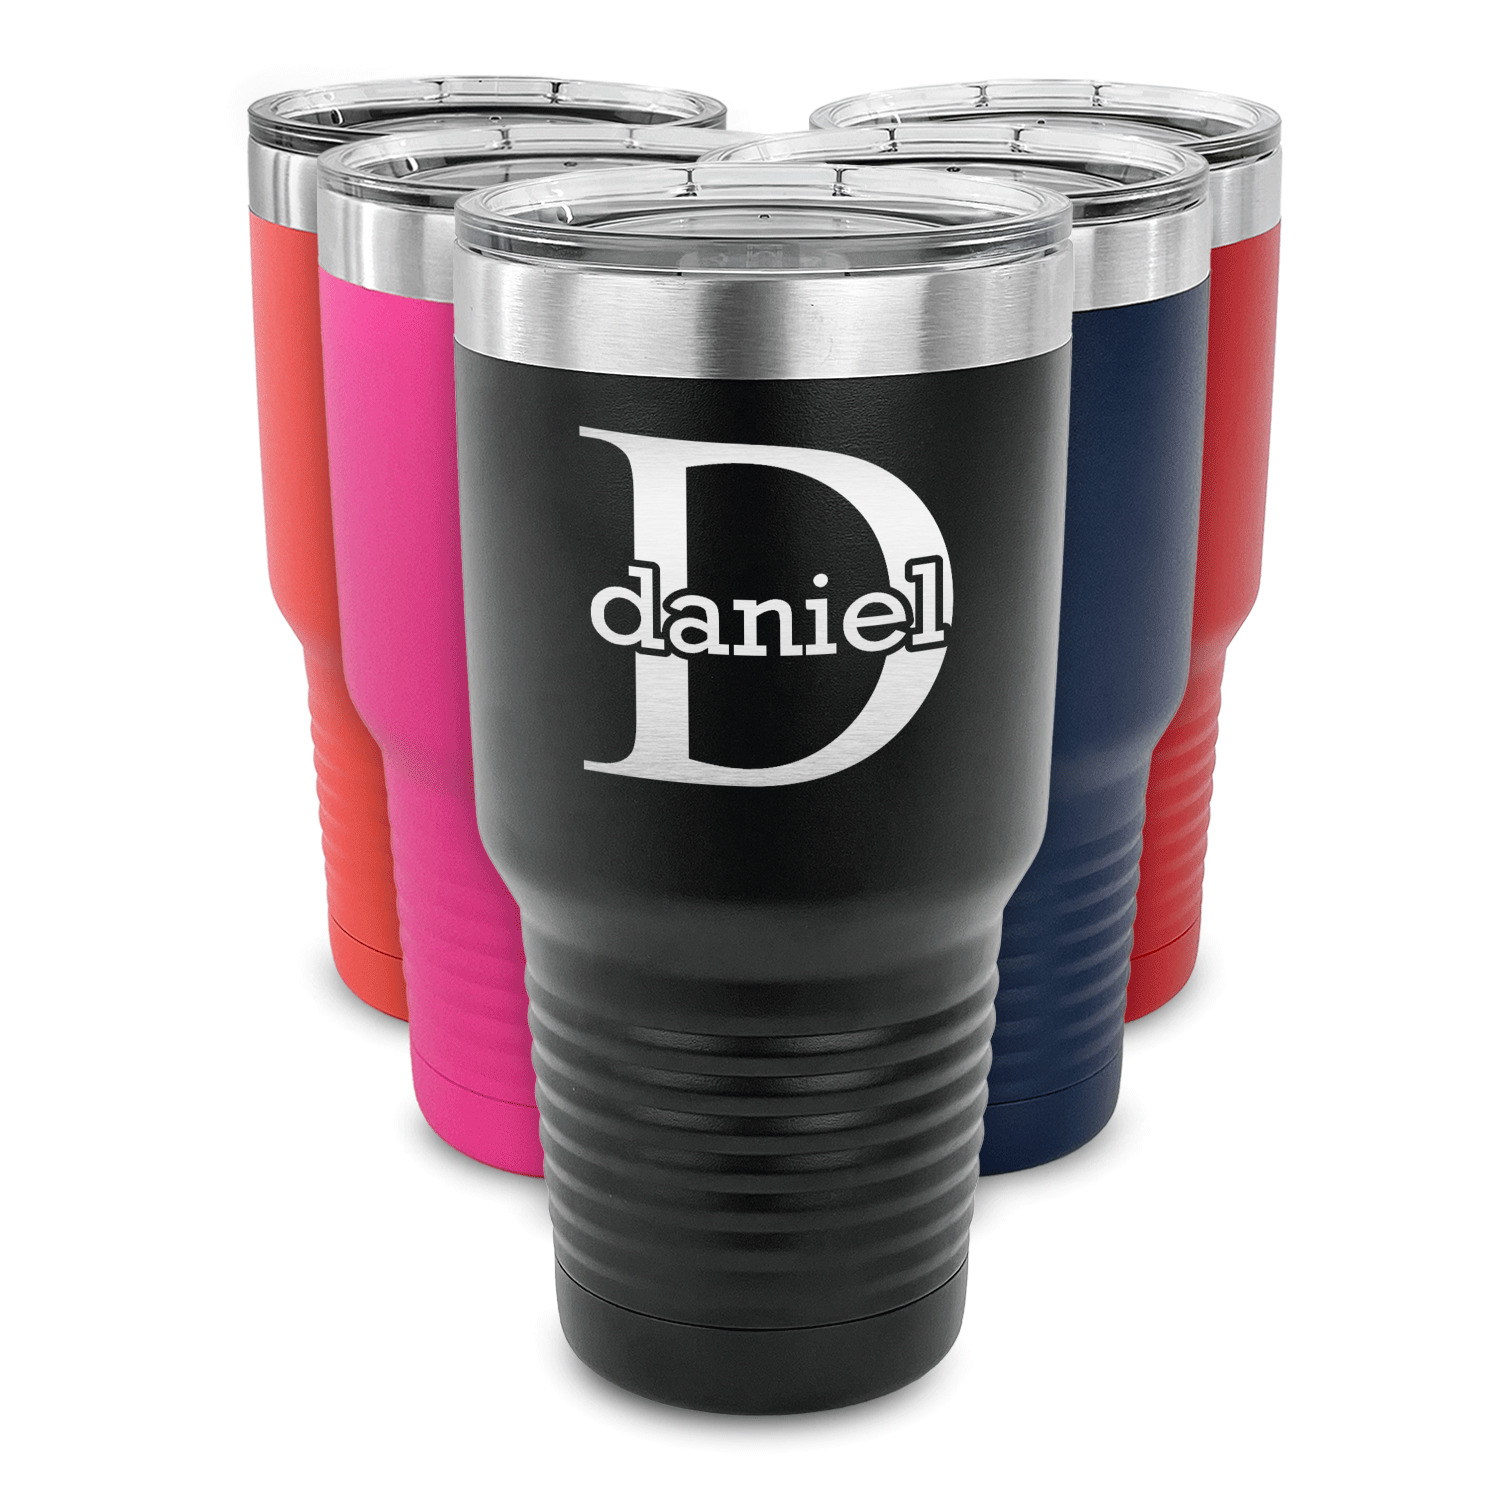 https://www.youcustomizeit.com/common/MAKE/837778/Name-Initial-for-Guys-30-oz-Stainless-Steel-Ringneck-Tumblers-Parent-Main.jpg?lm=1655151863